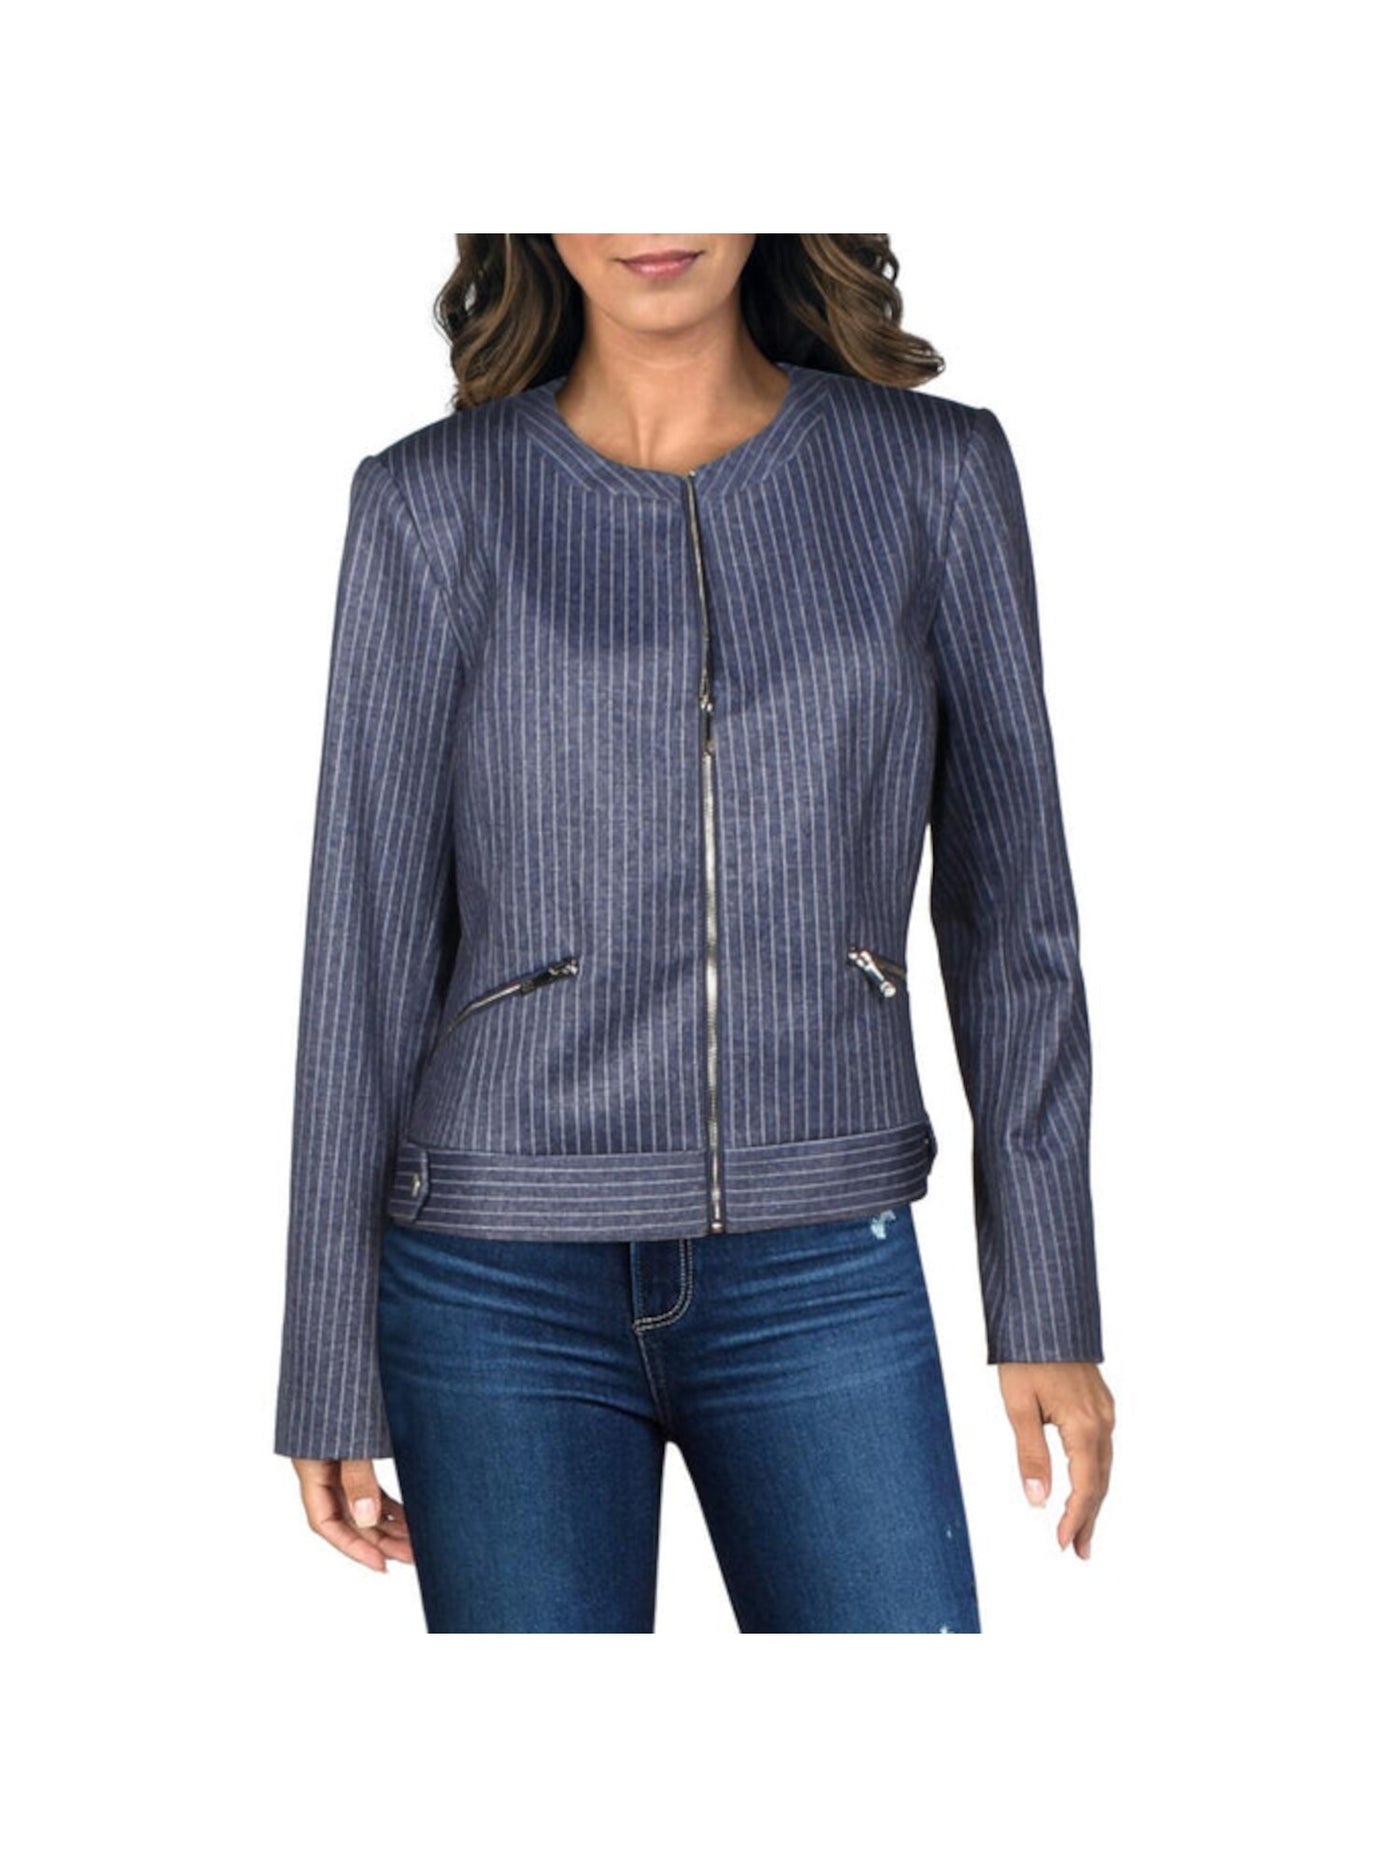 TOMMY HILFIGER Womens Blue Zippered Pocketed Lined Fitted Pinstripe Long Sleeve Collarless Wear To Work Blazer Jacket 12